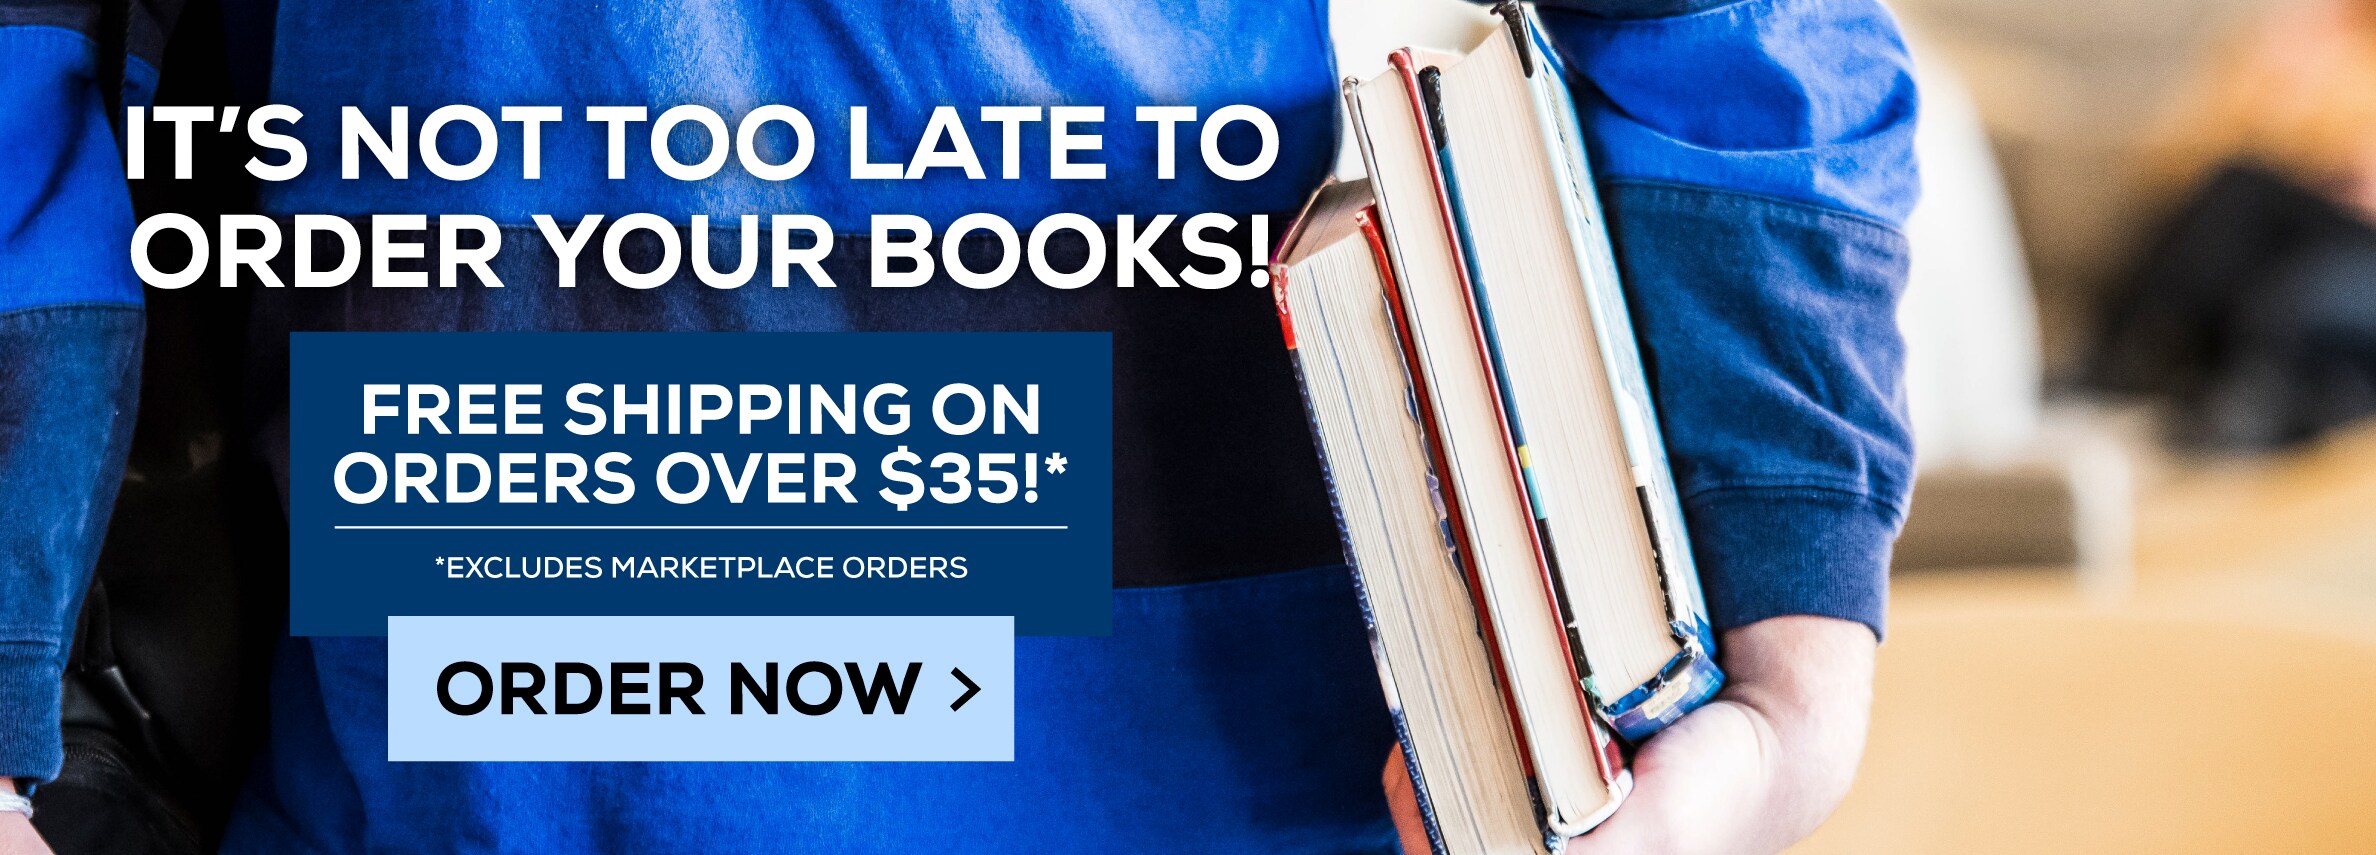 It's not too late to order your textbooks! Free shipping on all orders over $35.* Excludes Marketplace Purchases. Order now